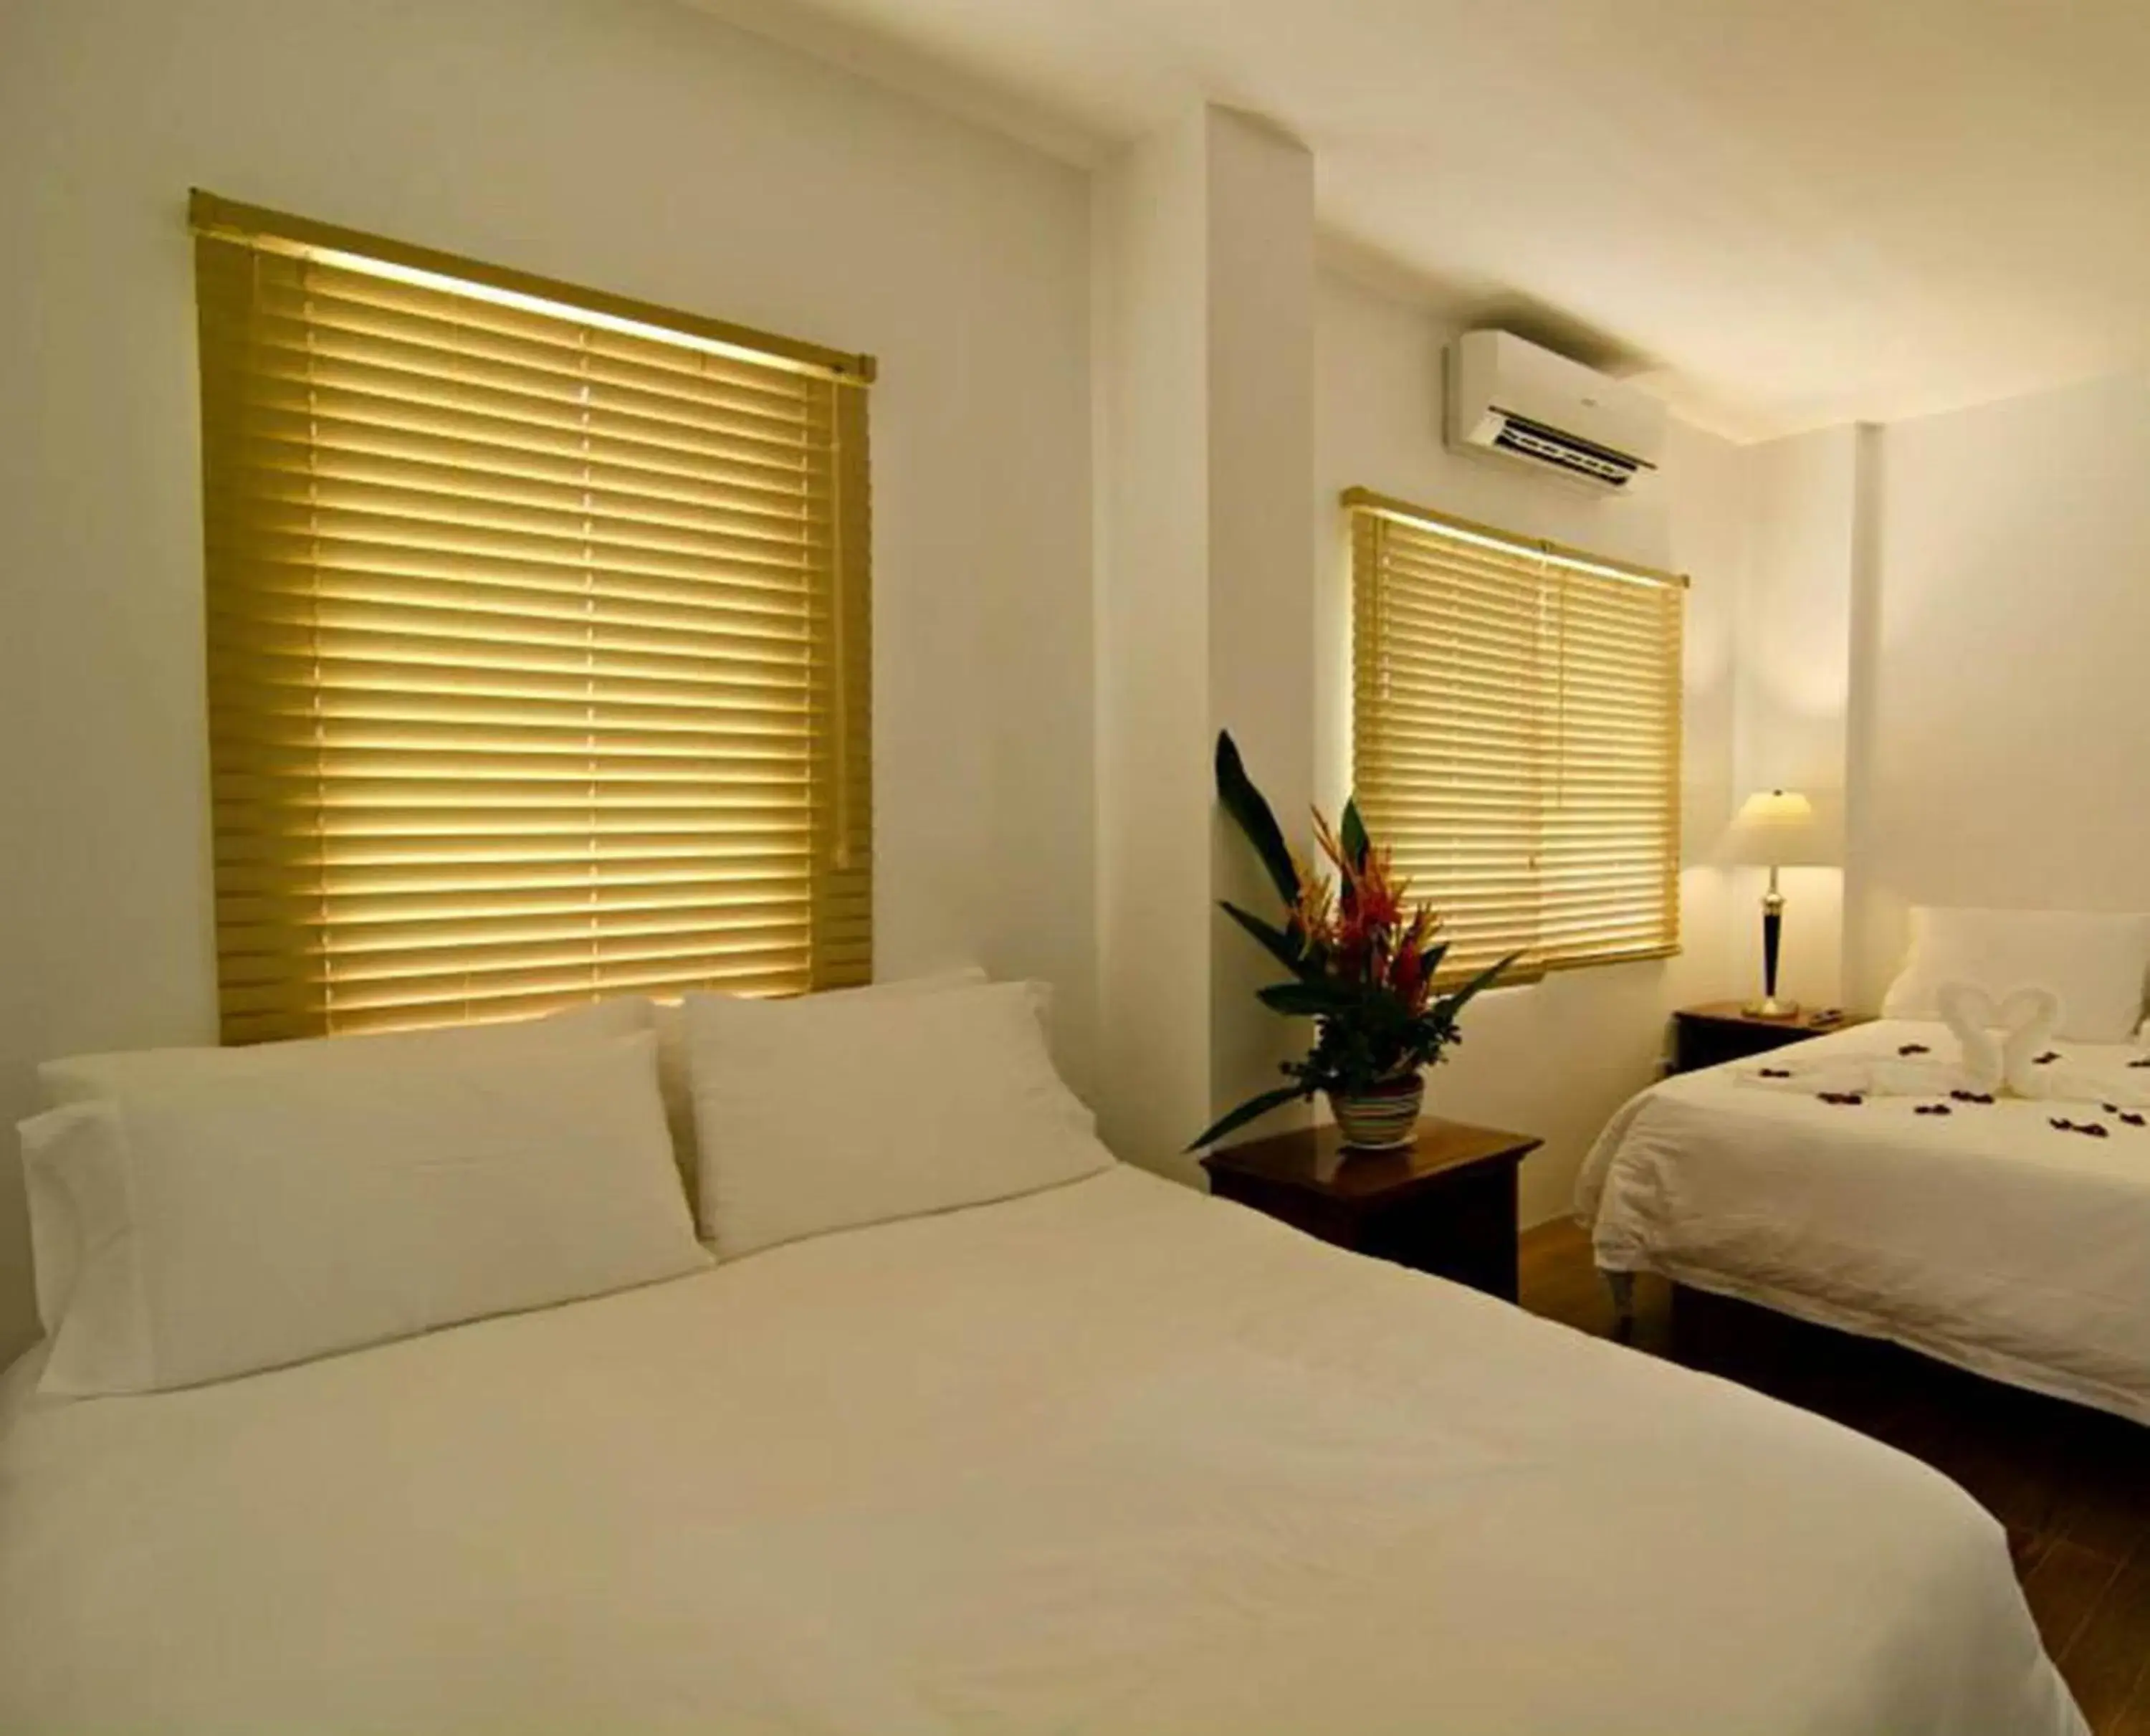 Bed in Discover Boracay Hotel